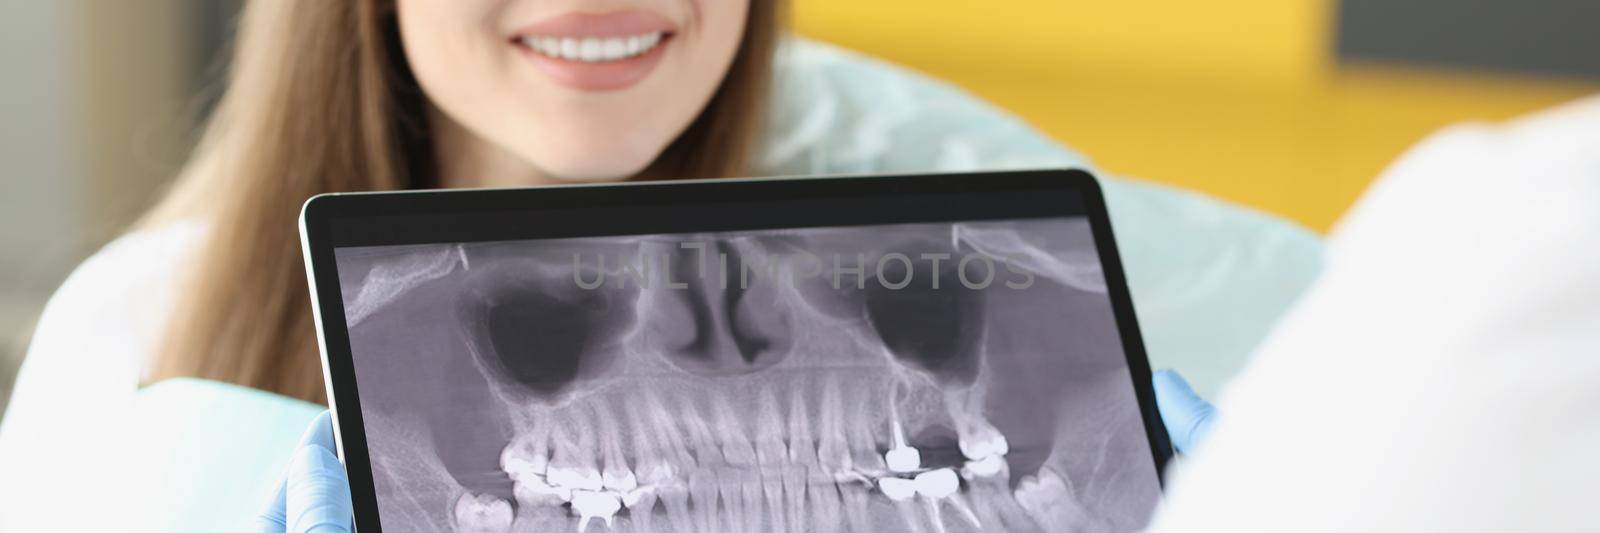 Dental consultation in clinic and doctor examine teeth x ray on digital tablet screen by kuprevich